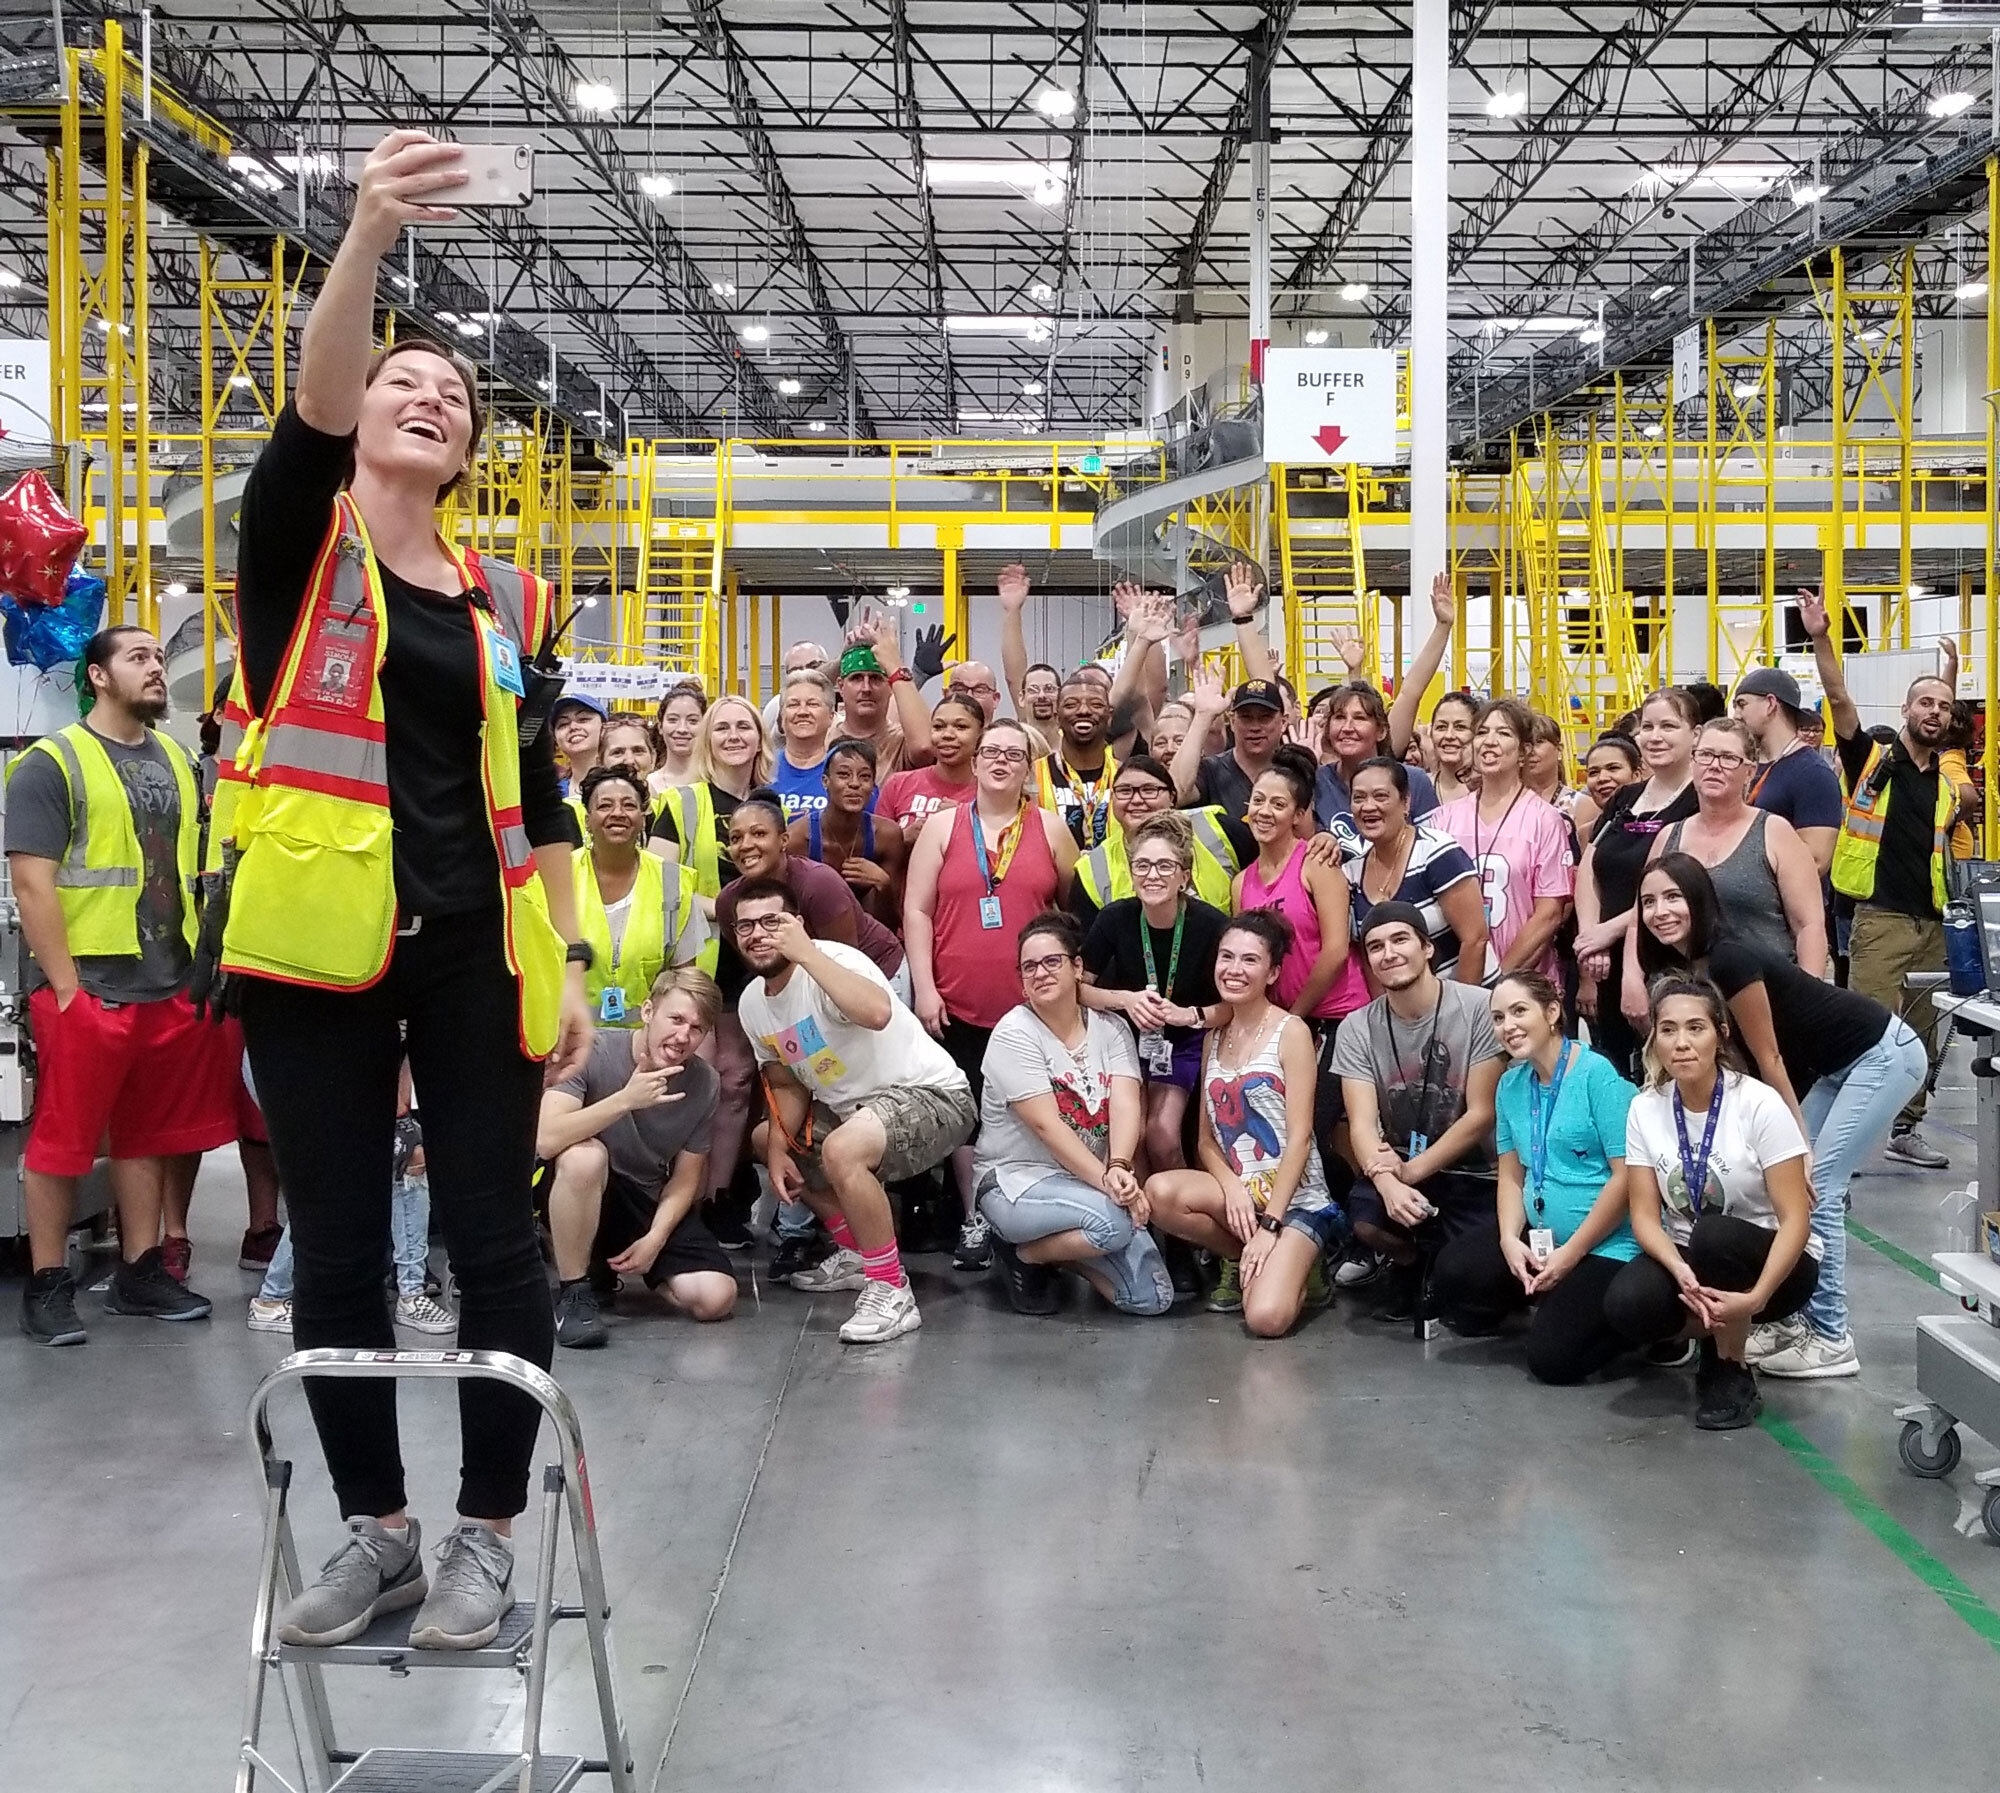 An Amazon associate stands on a step stool, with her arm extended, holding her iPhone in order to capture a selfie. Behind her, dozens of Amazon associates pose for the photo.